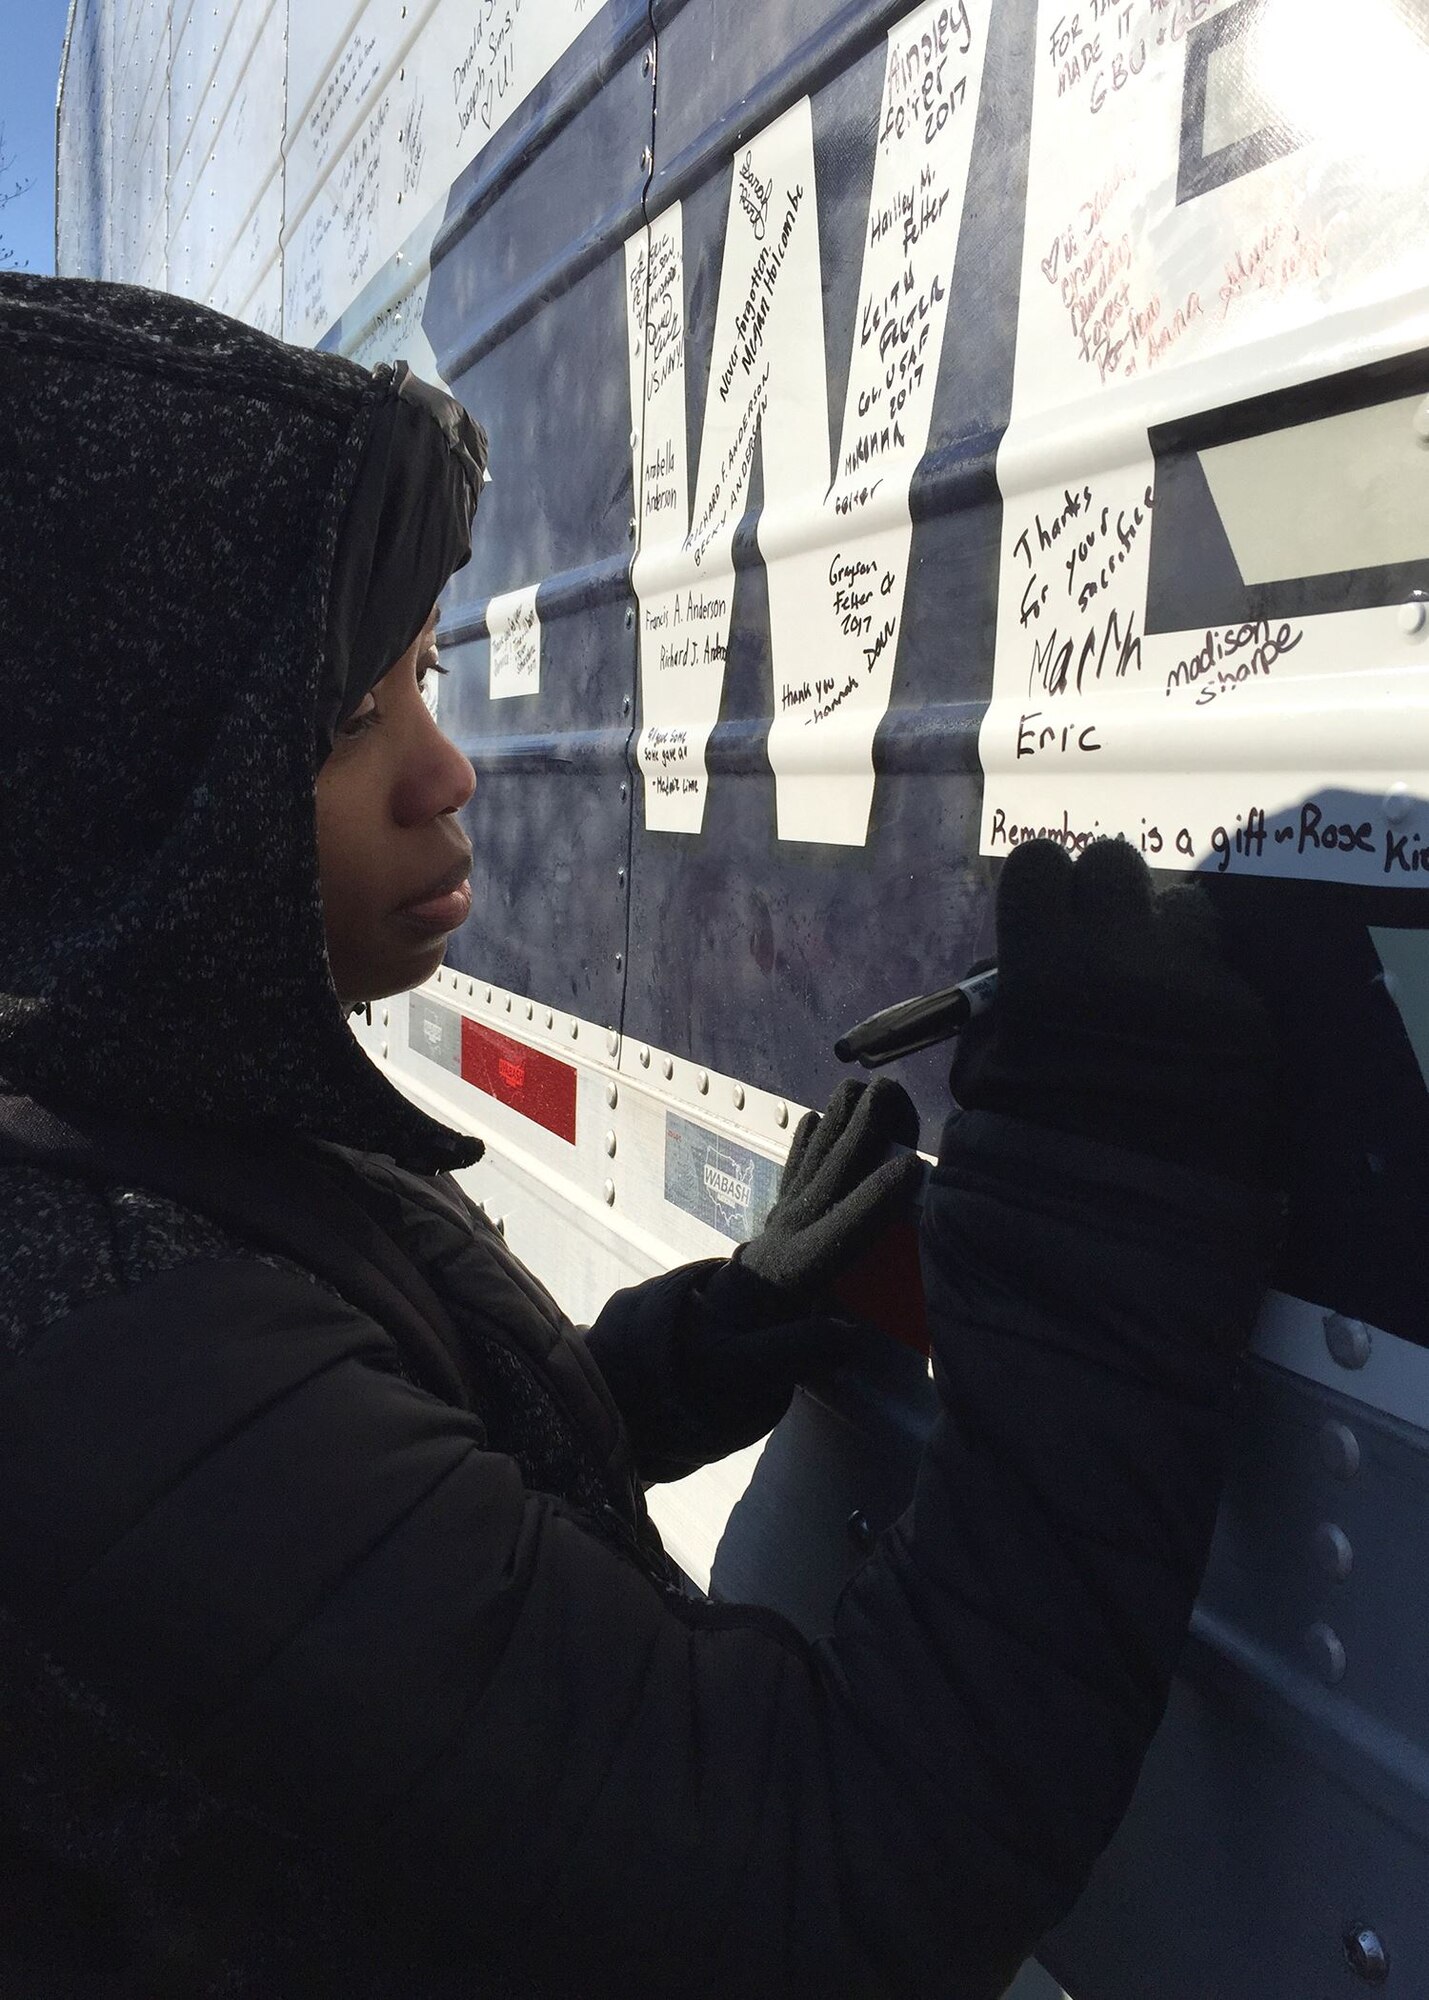 SrA Chelica Thompson, 436th Airlift Wing judge advocate general from Dover Air Force Base, Del., writes a message on one of the wreath-carrying trucks Dec. 16, 2017, at Arlington National Cemetery in Arlington, Va. Through personalized messages, volunteers expressed their gratitude for the fallen for all to see. (U.S. Air Force photo by 2nd Lt. Natasha O. Mosquera)